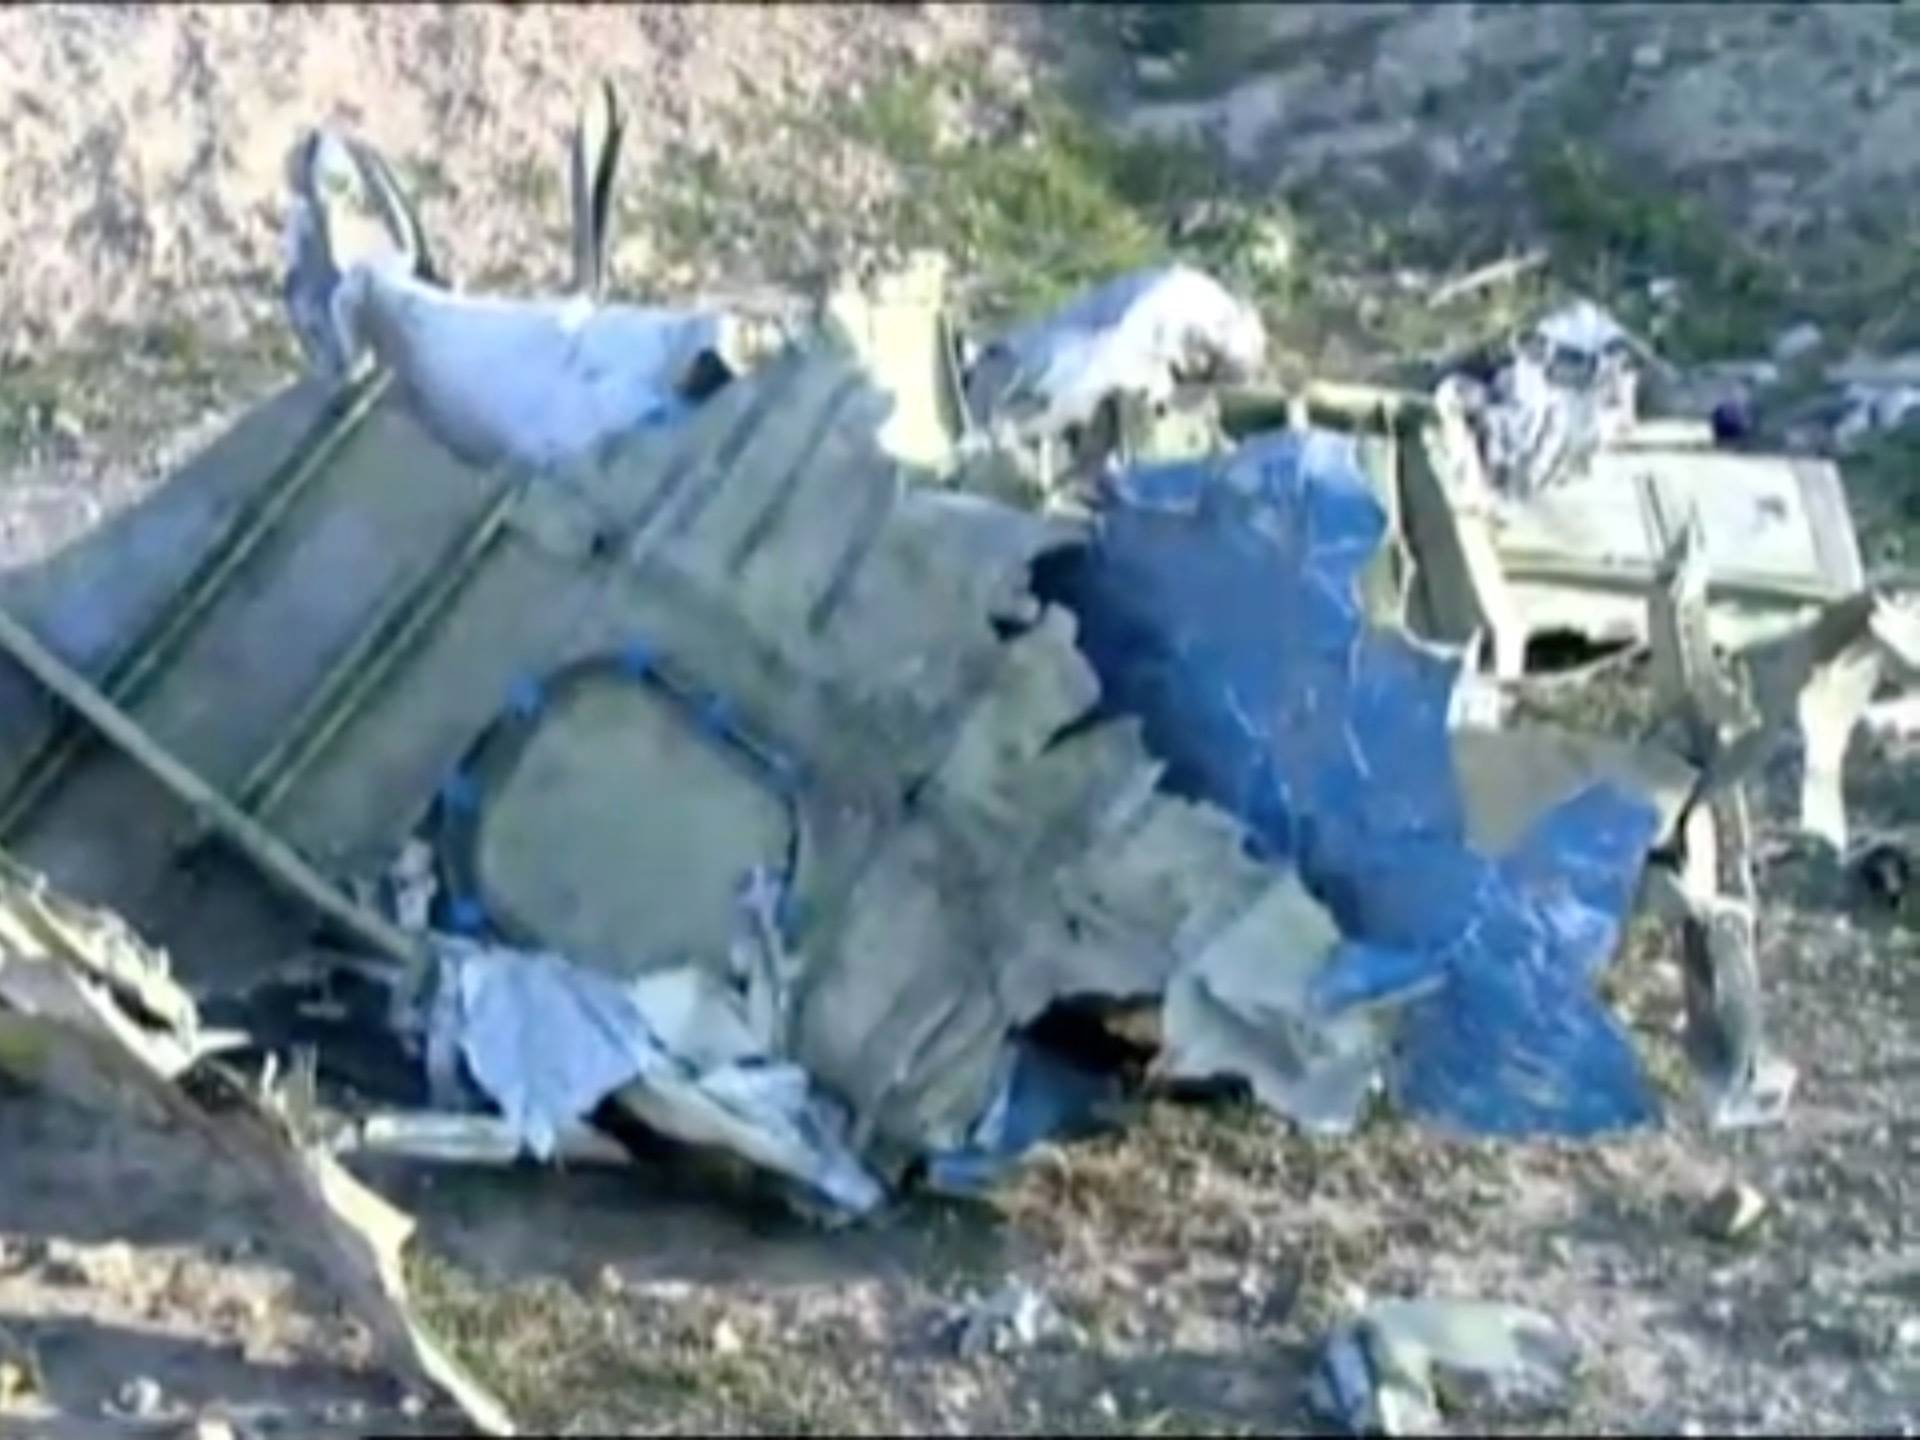 Part of the wreckage from Ukraine International Airlines flight PS752, a Boeing 737-800 plane that crashed after taking off from Tehran's Imam Khomeini airport